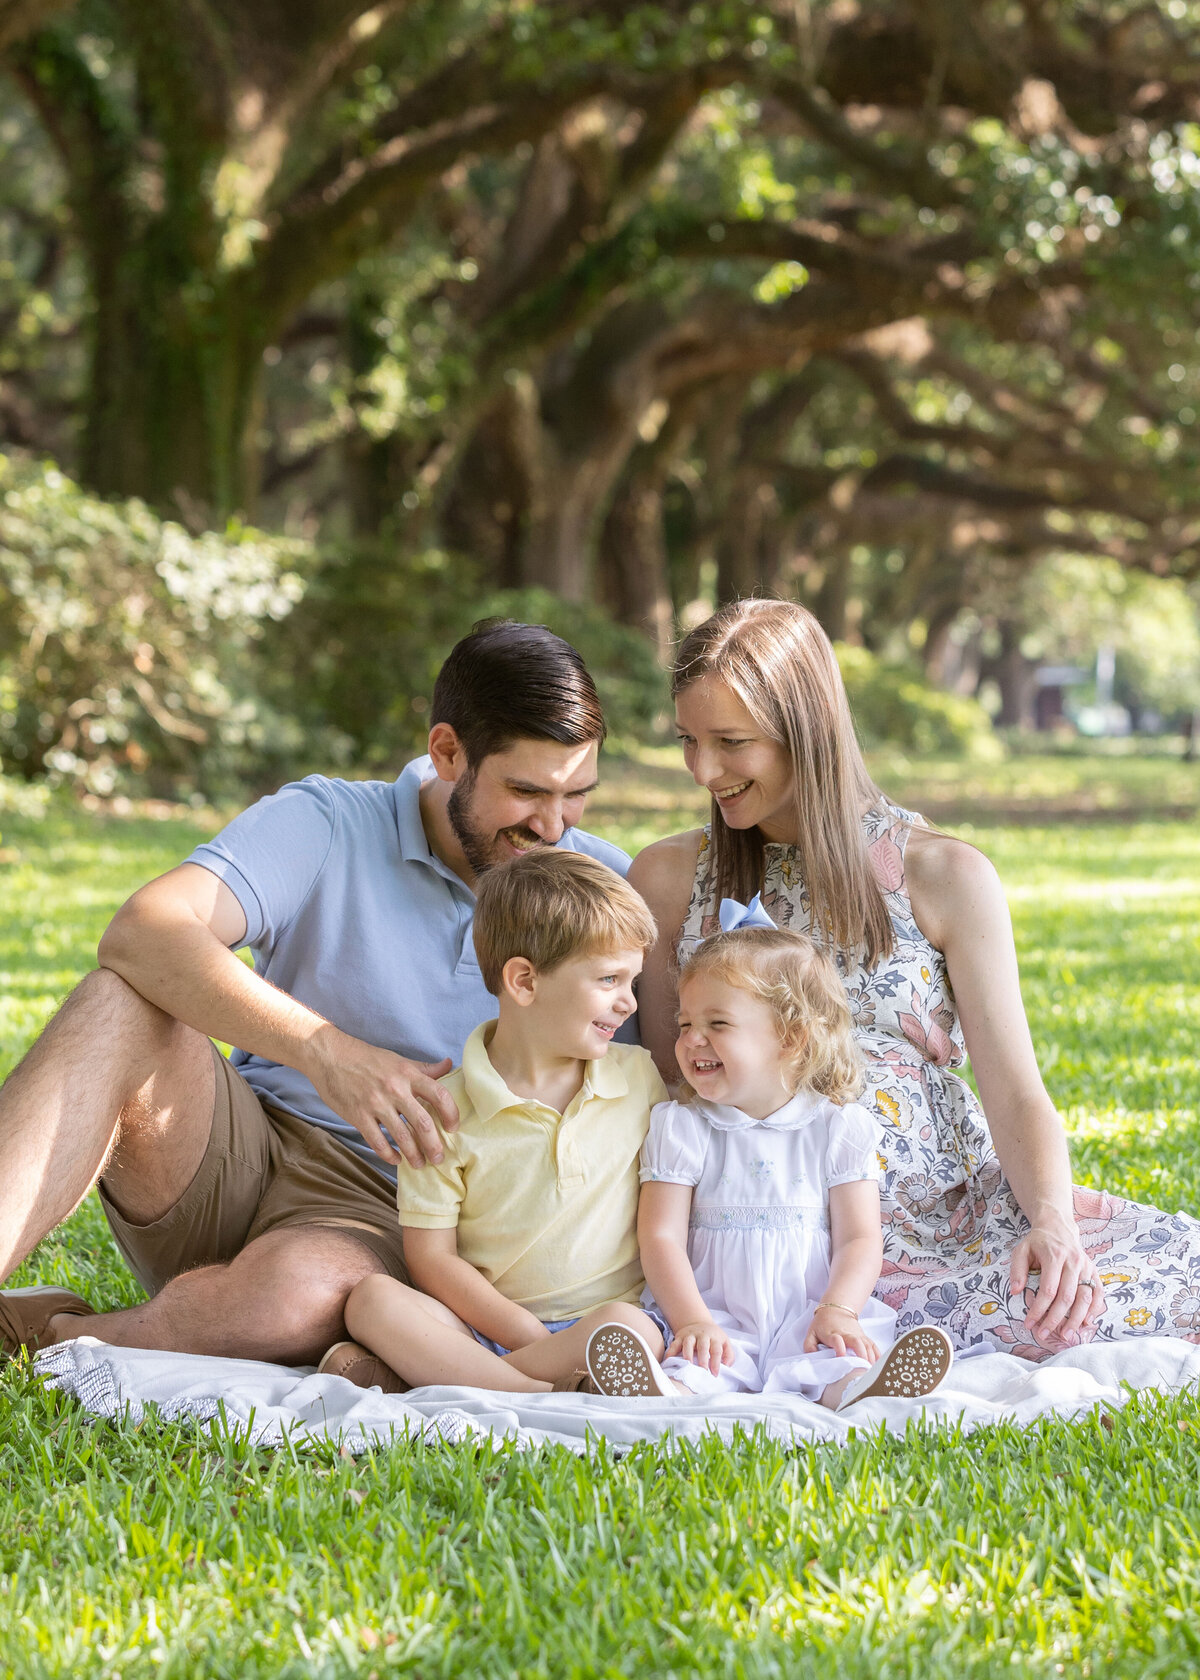 Family portrait session at Springhill College in Mobile, Alabama.